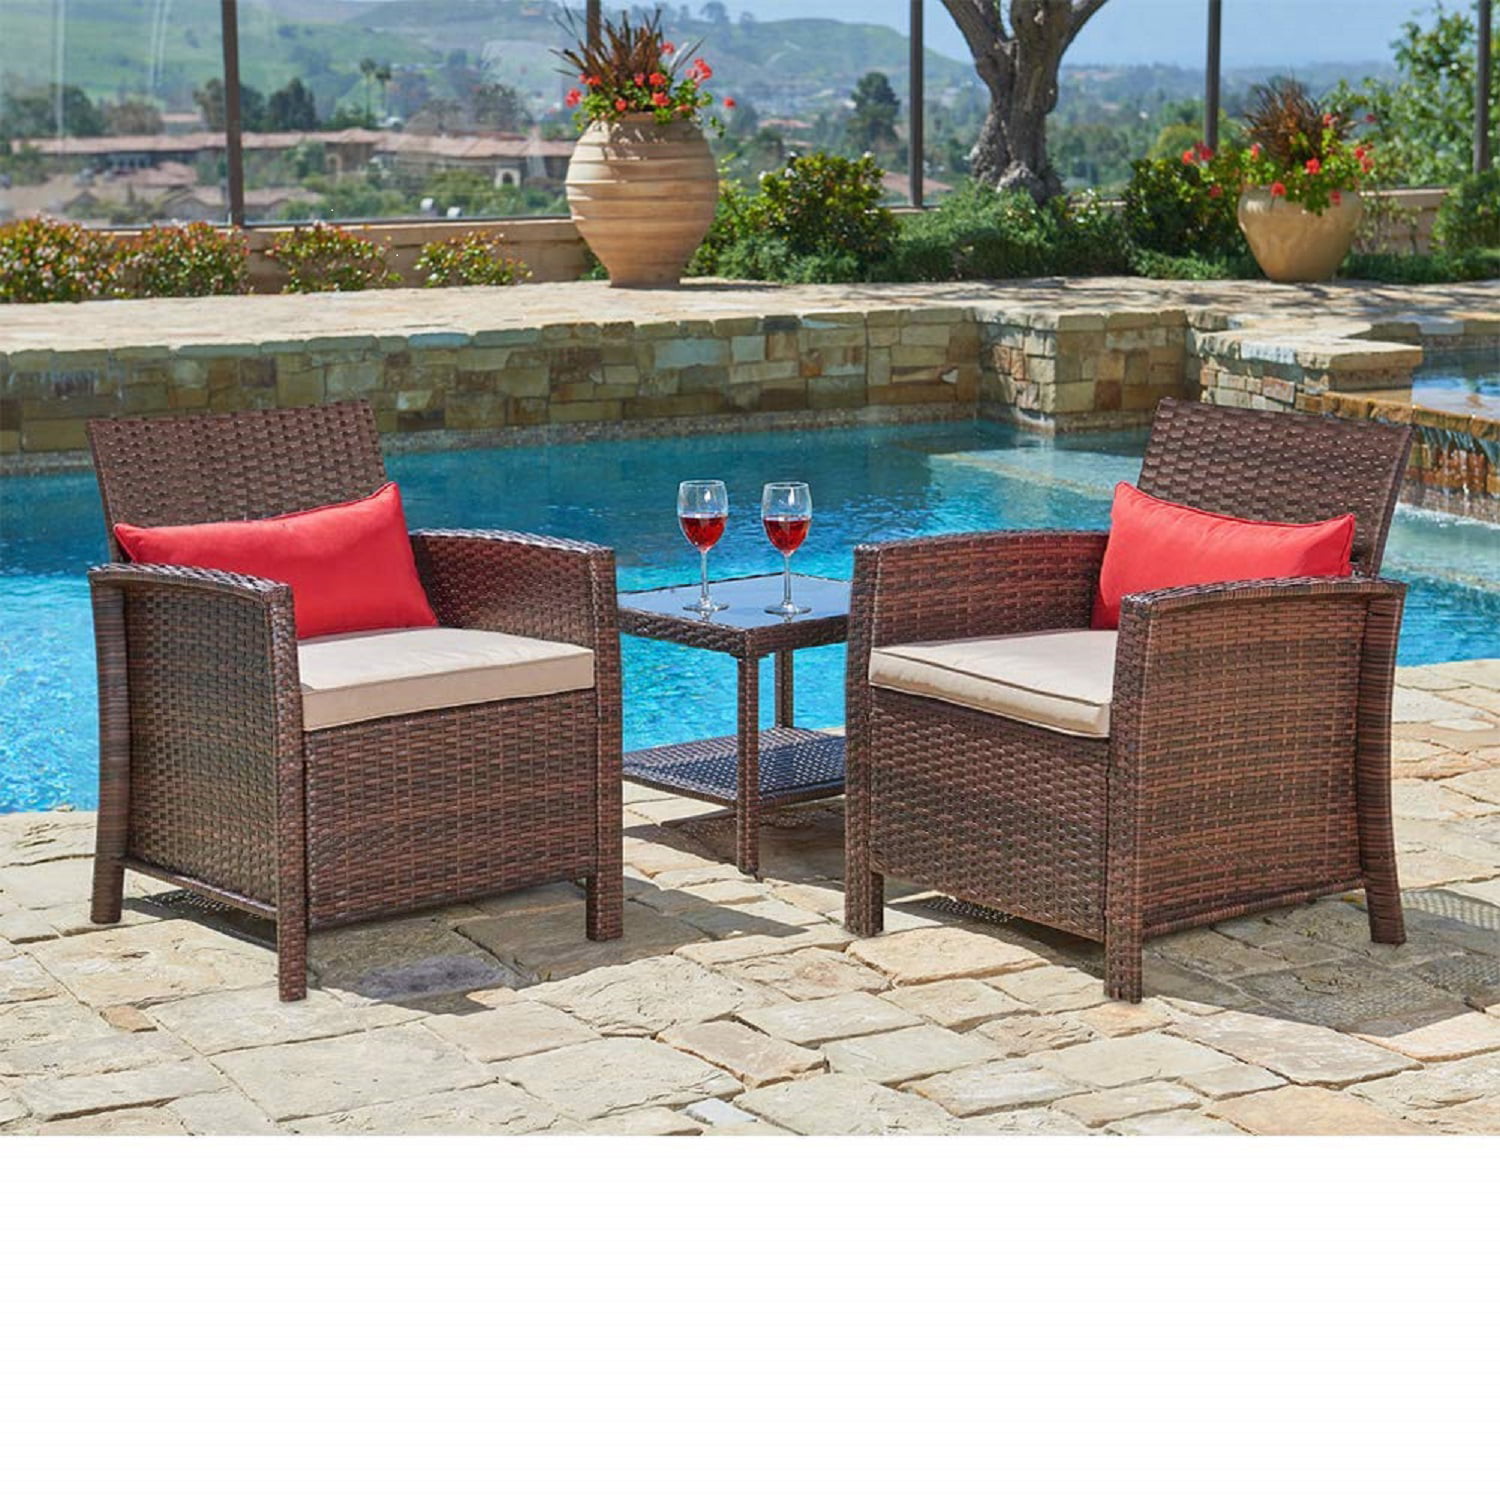 SUNCROWN Outdoor Furniture 3-Piece Patio Bistro Sets Brown Wicker Chairs  with Glass Top Table Set, Thick Durable Cushions with Washable Covers 